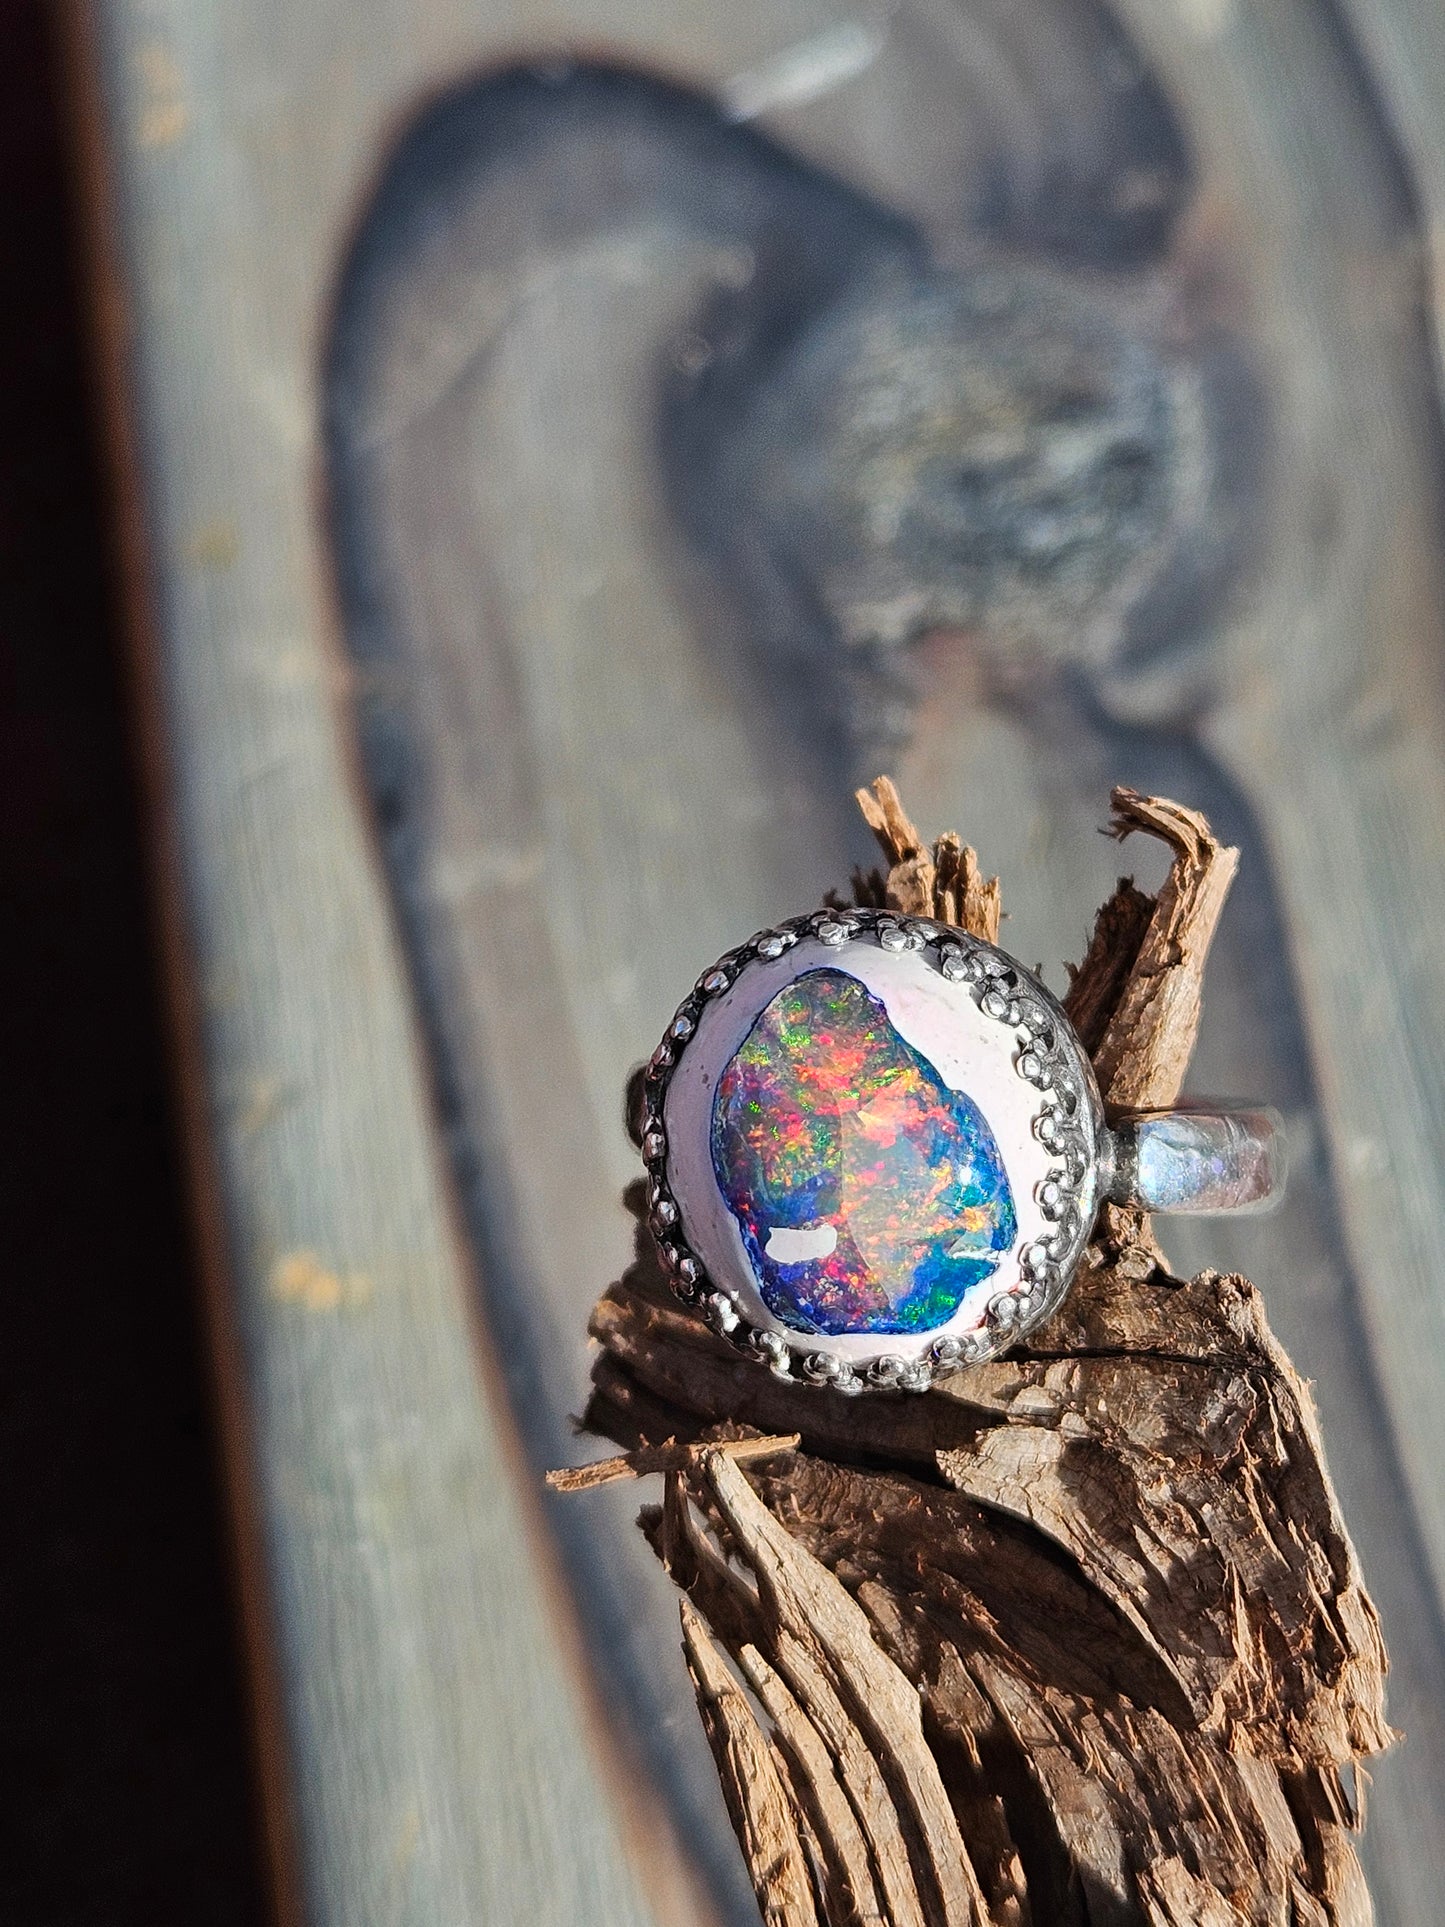 "Juice" Immaculate Mexican Galaxy Opal Ring, size 8.5